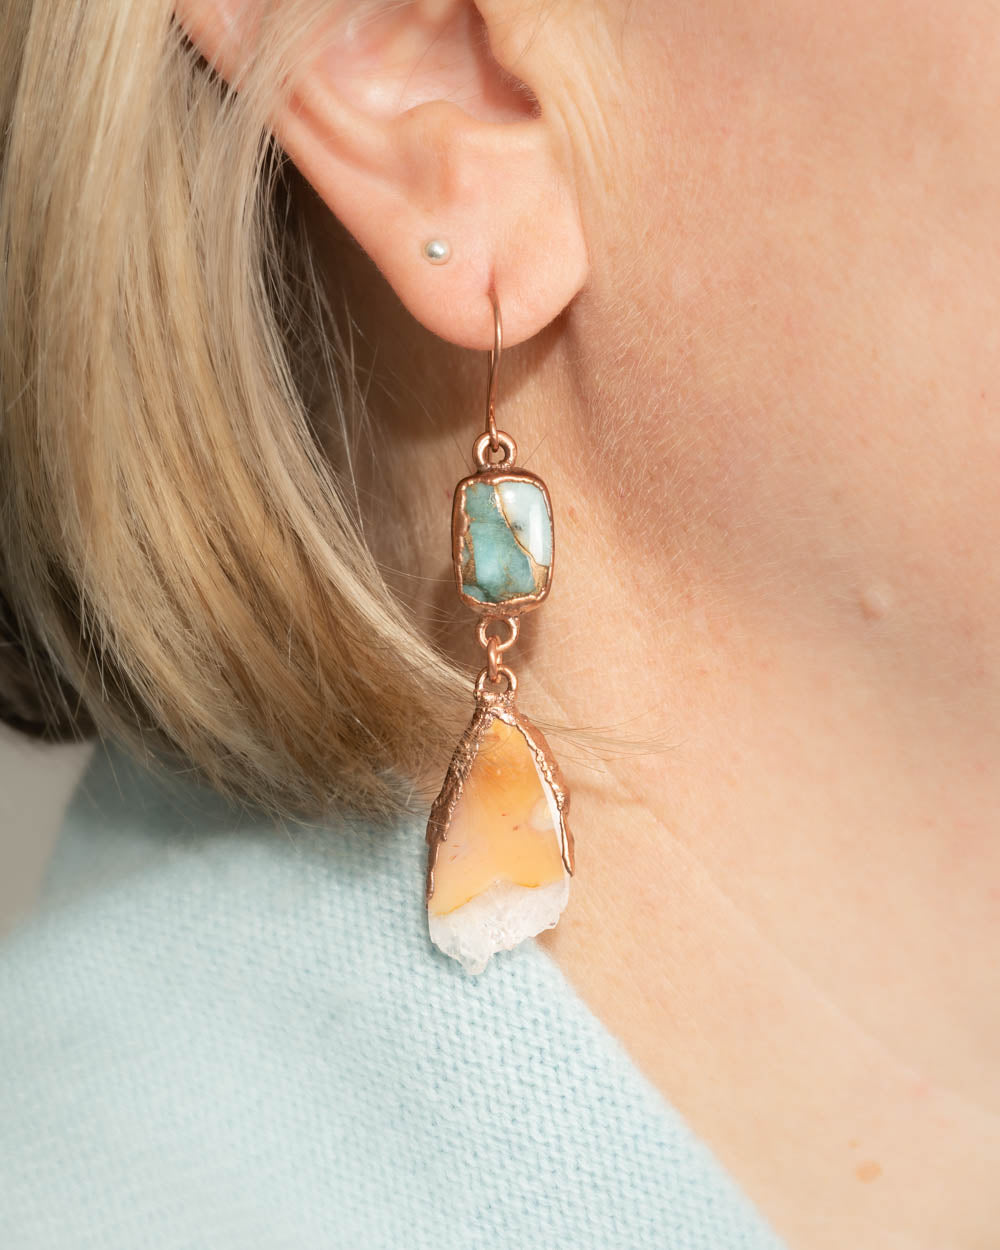 Super Fun and Unique Earrings